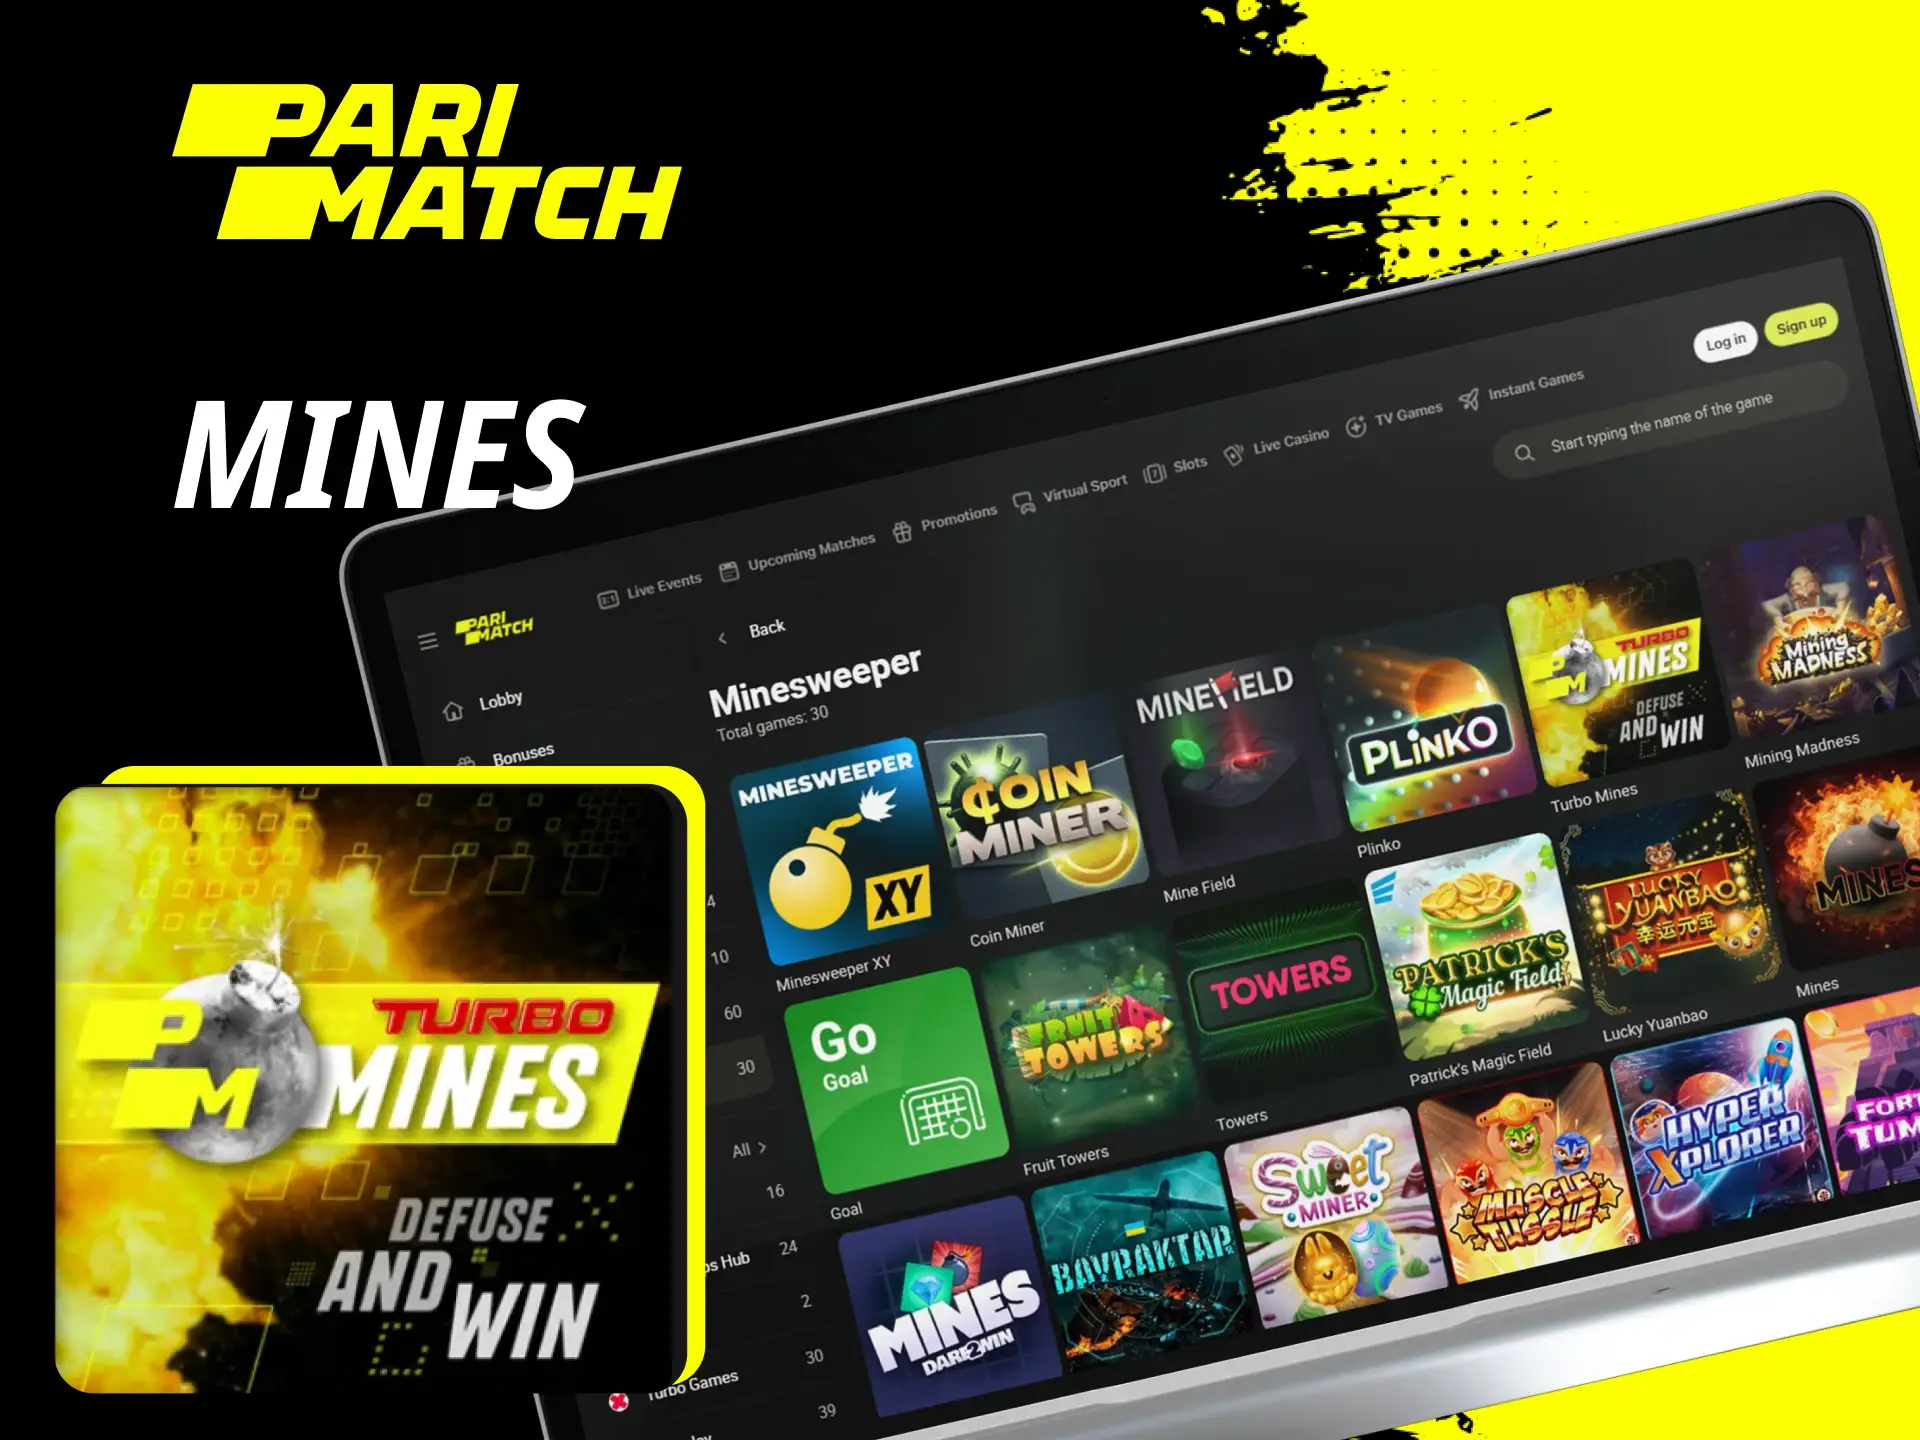 What is the point of playing mines on the Parimatch online casino website.